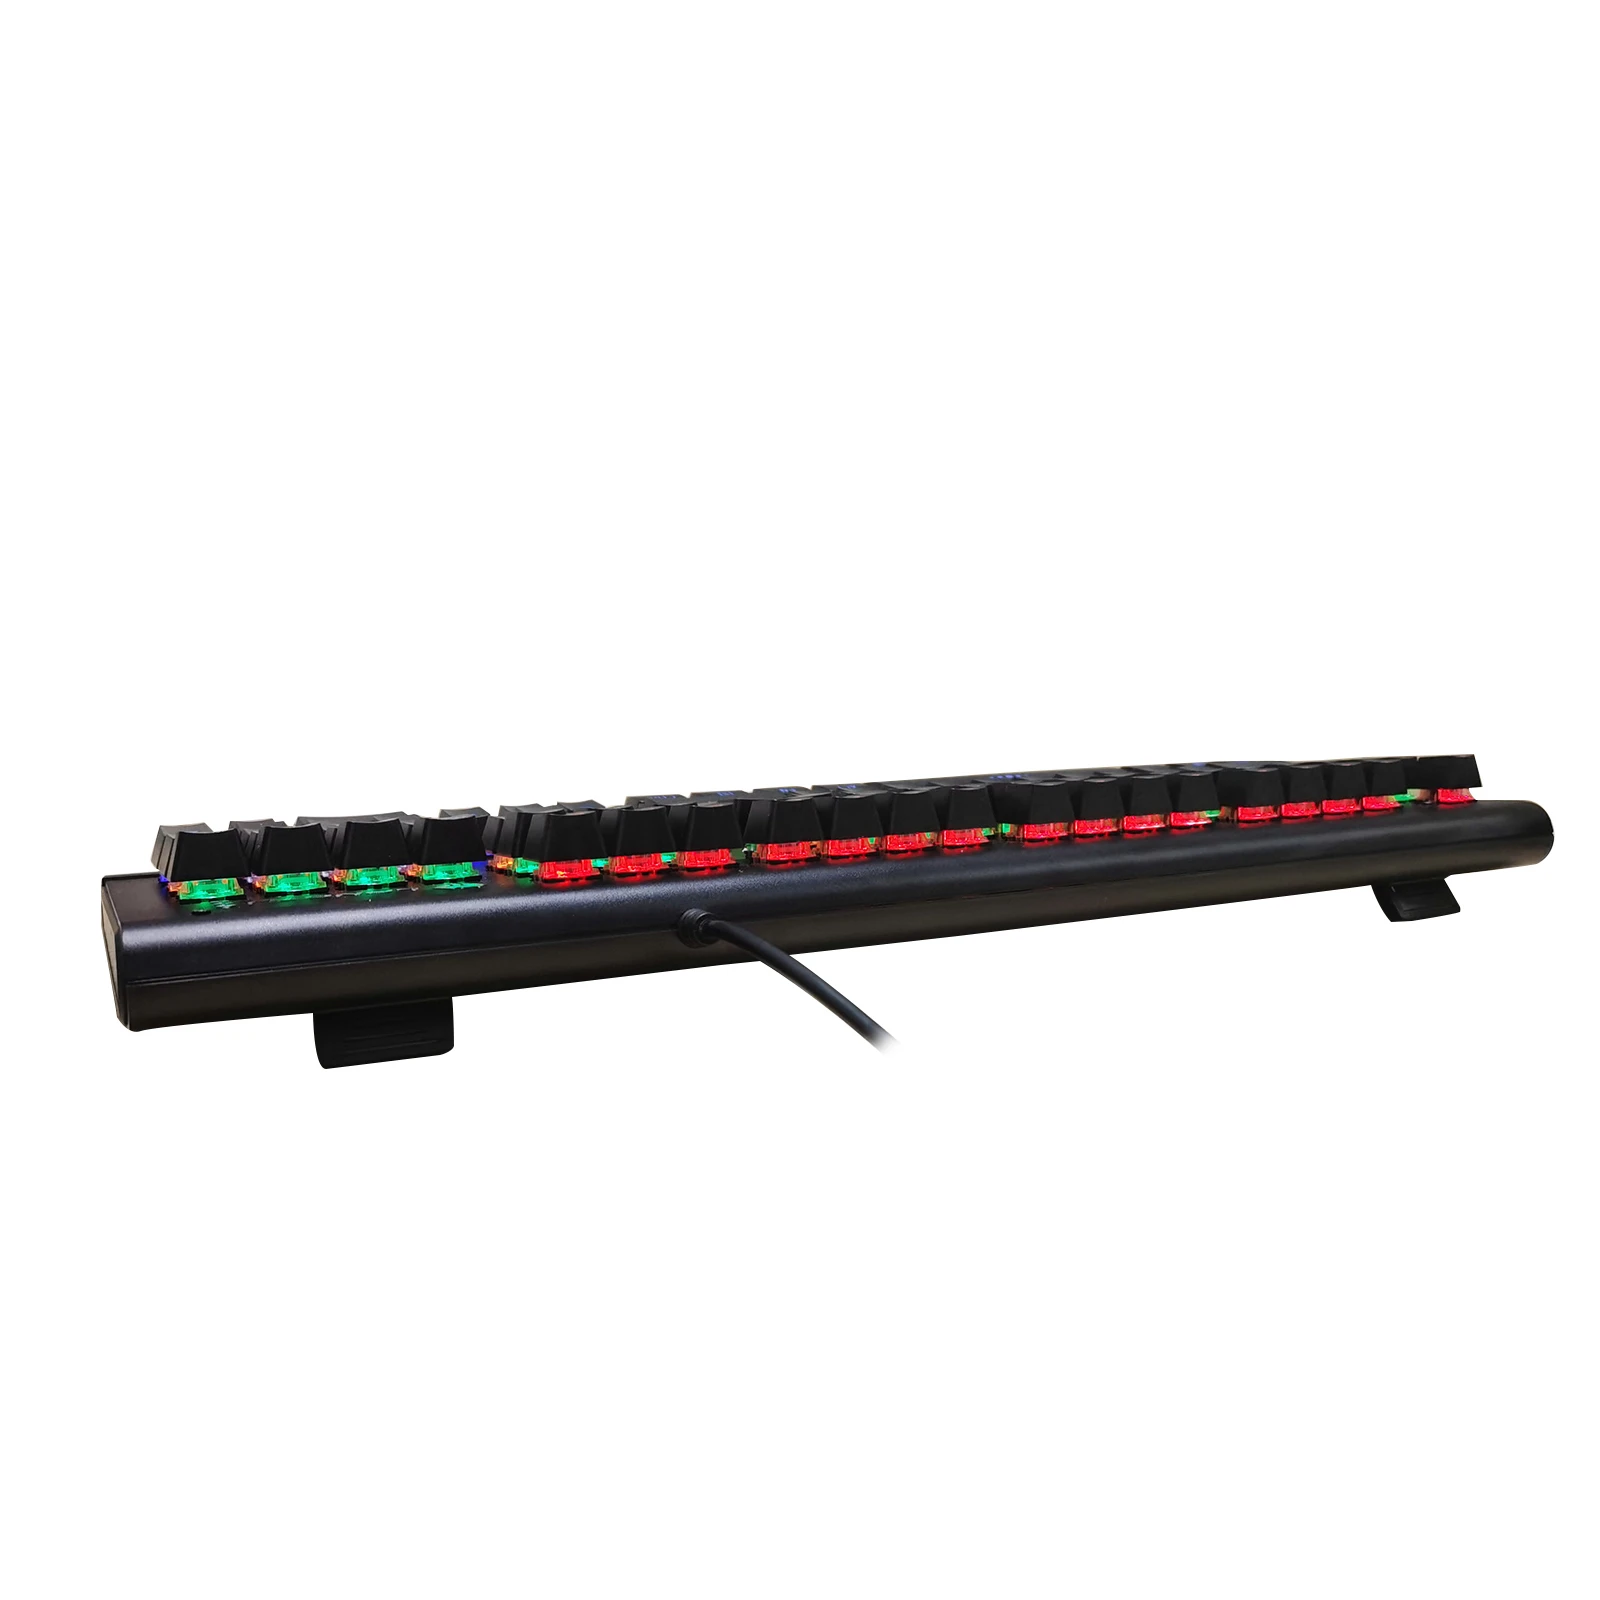 Keyboard 104 Keys Wired LED Backlight English Version Mechanical Gaming For PC Laptop Tablet